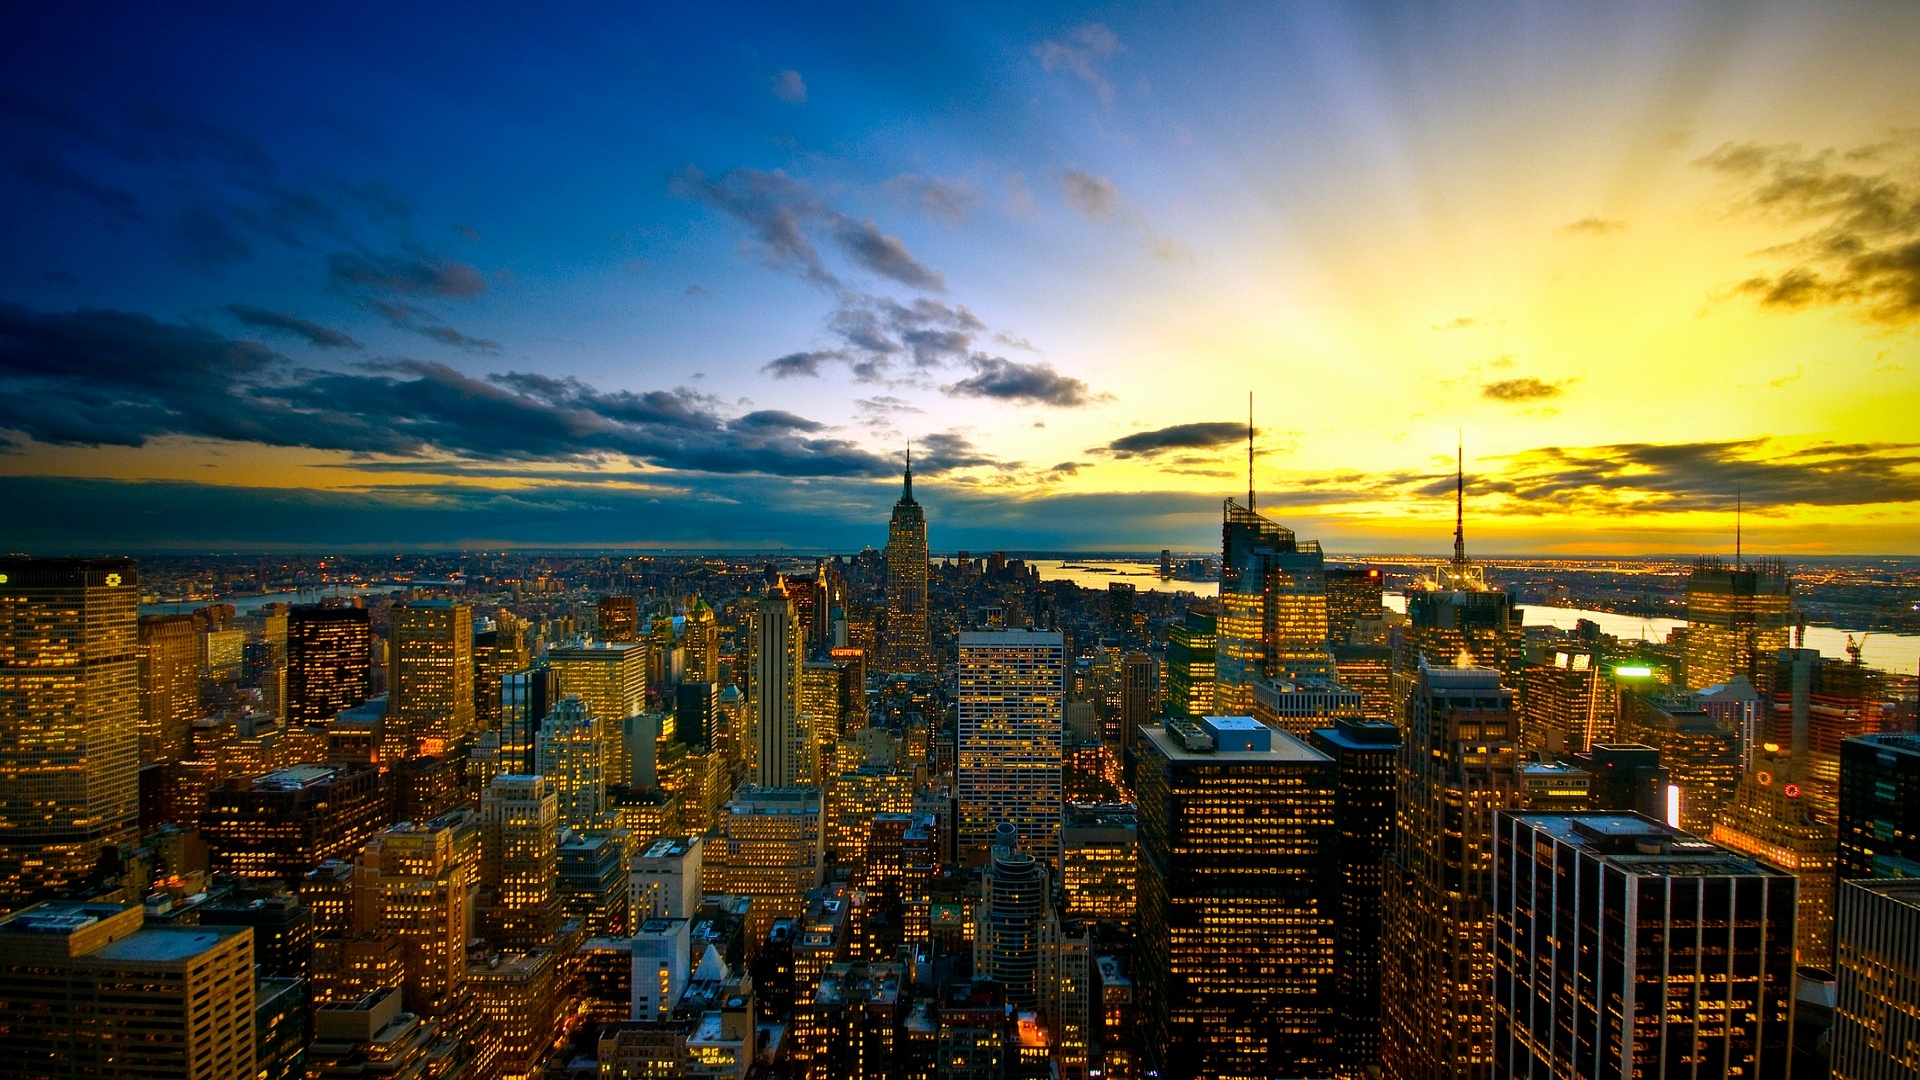 Cityscape Desktop Wallpapers - HD Wallpapers Backgrounds of Your ...